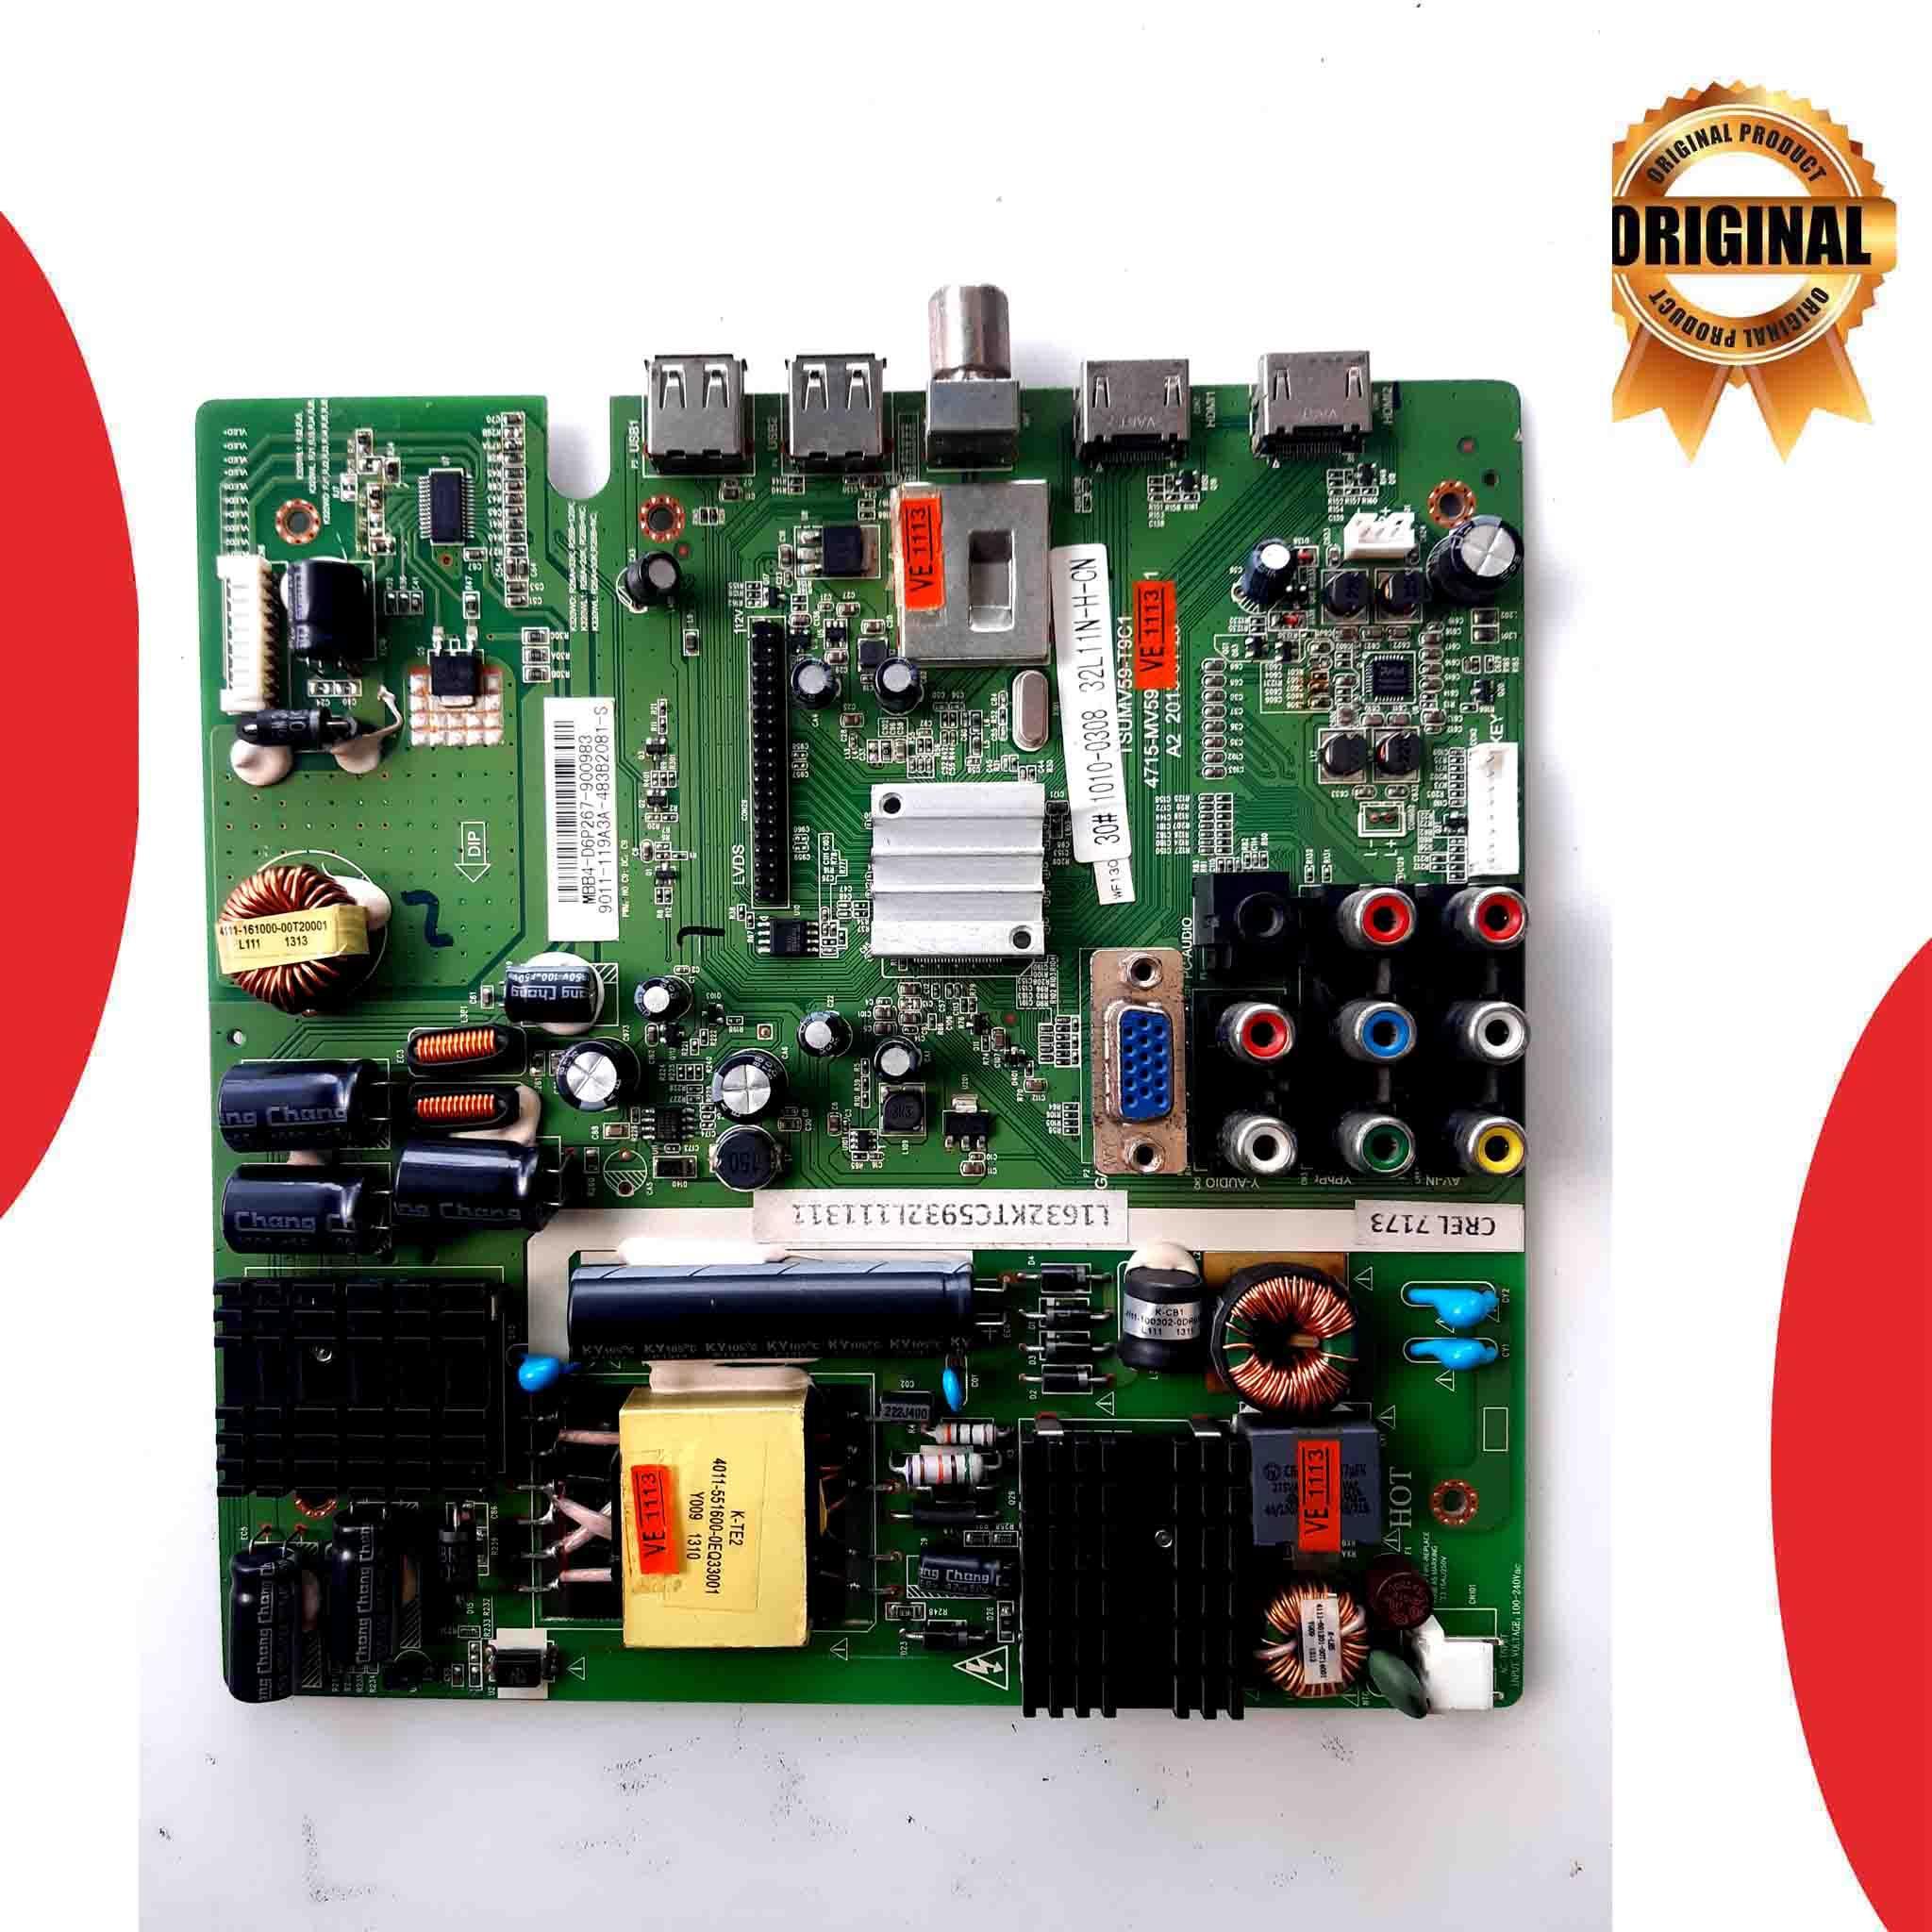 Croma 50 inch LED TV Motherboard for Model CREL7173 - Great Bharat Electronics